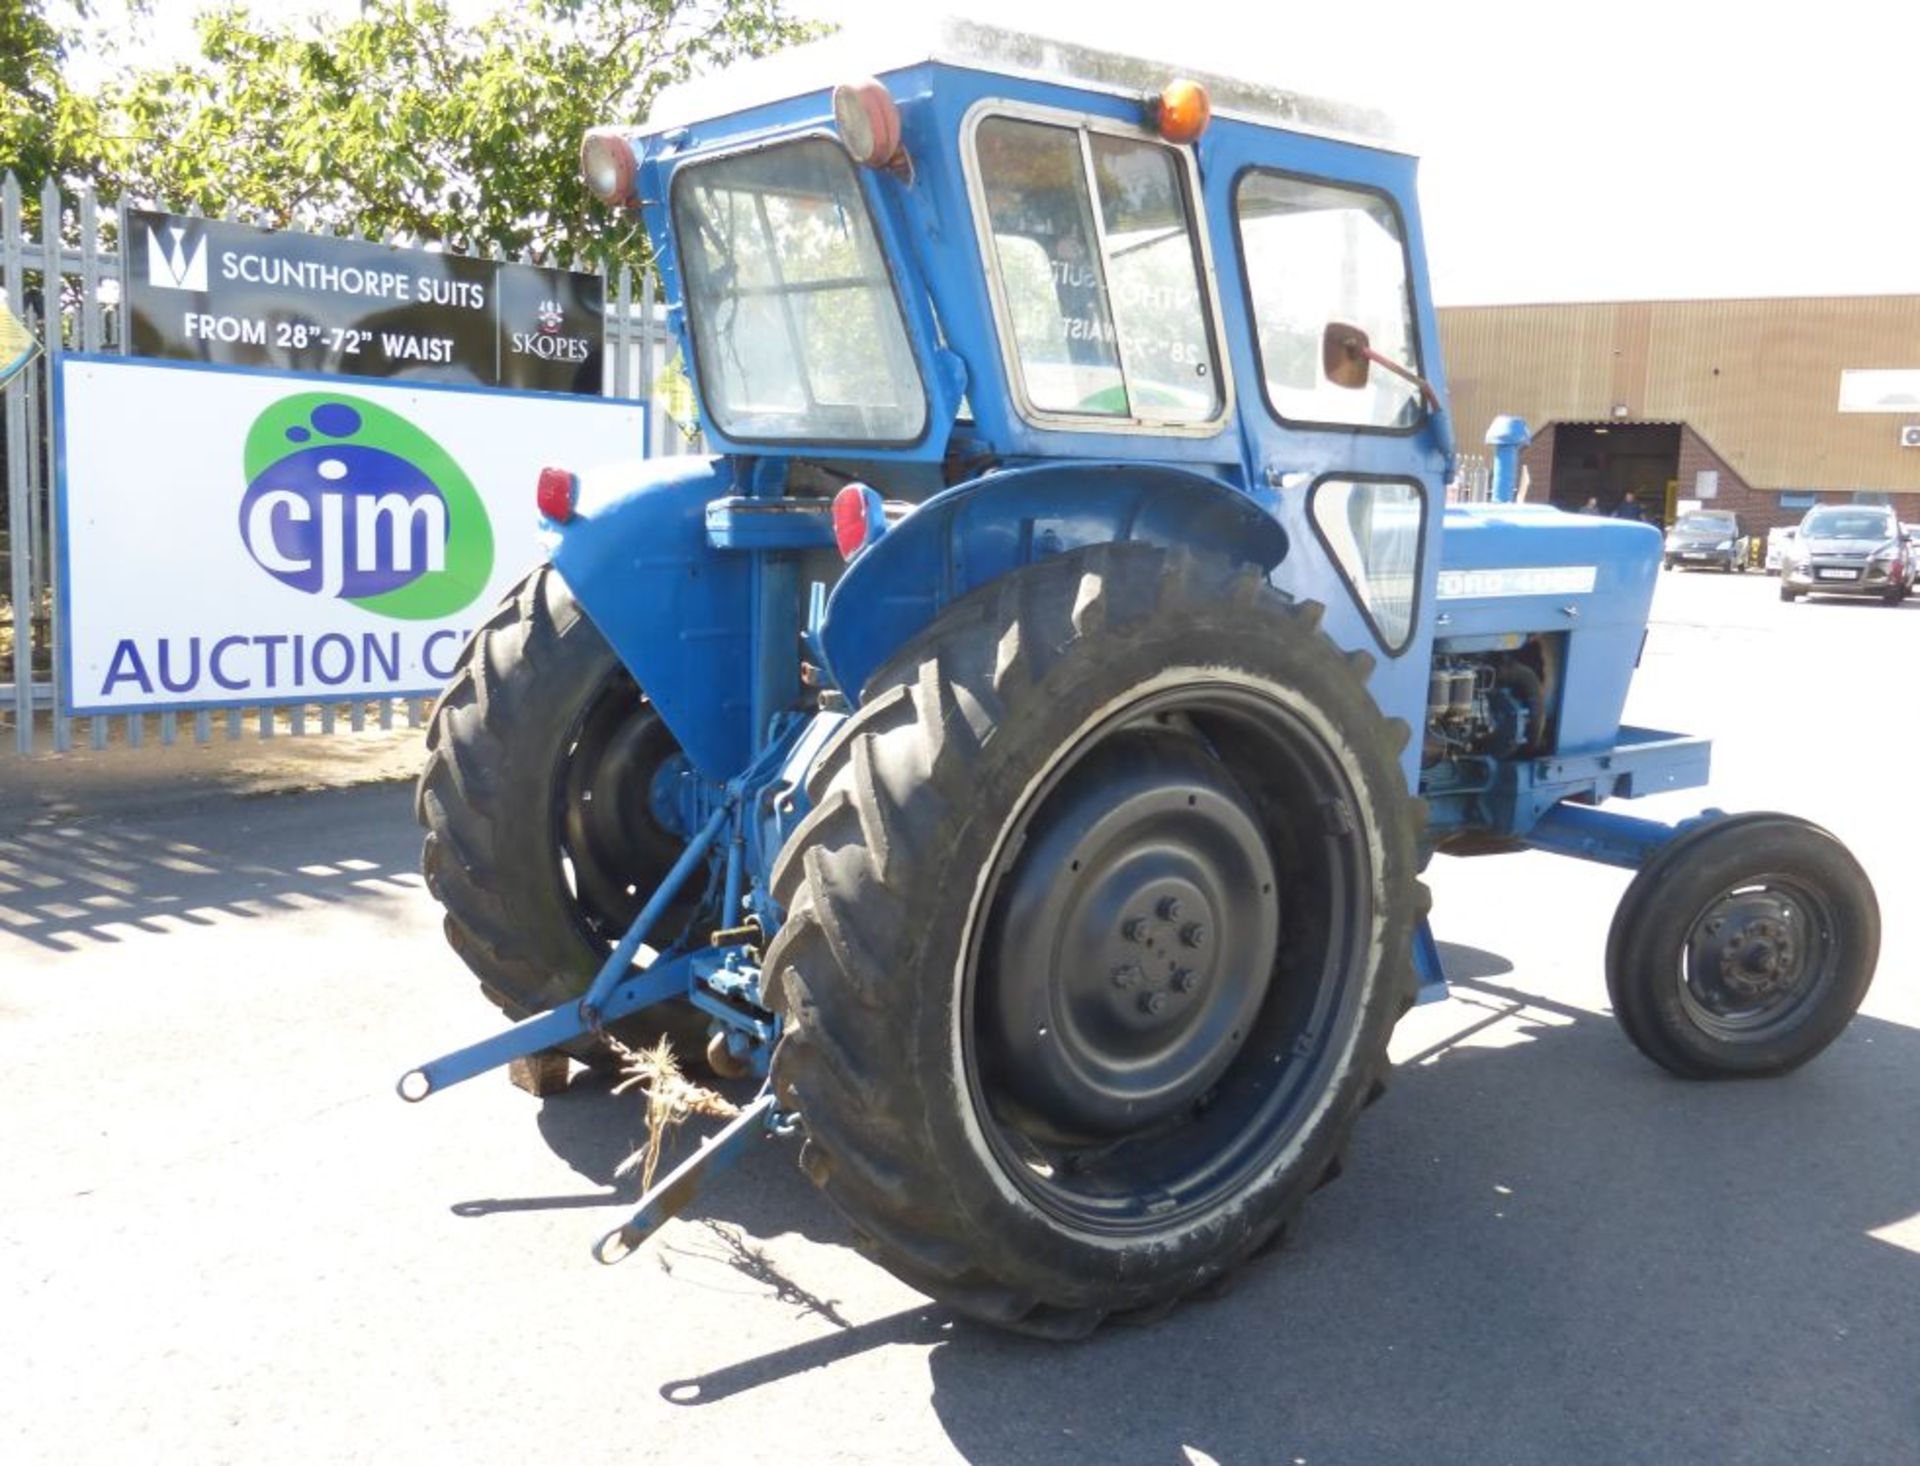 1969 Ford 4000 2WD Tractor fitted with a Duncan Slant Safety Cab, 3 CYL Diesel Engine - Image 5 of 18